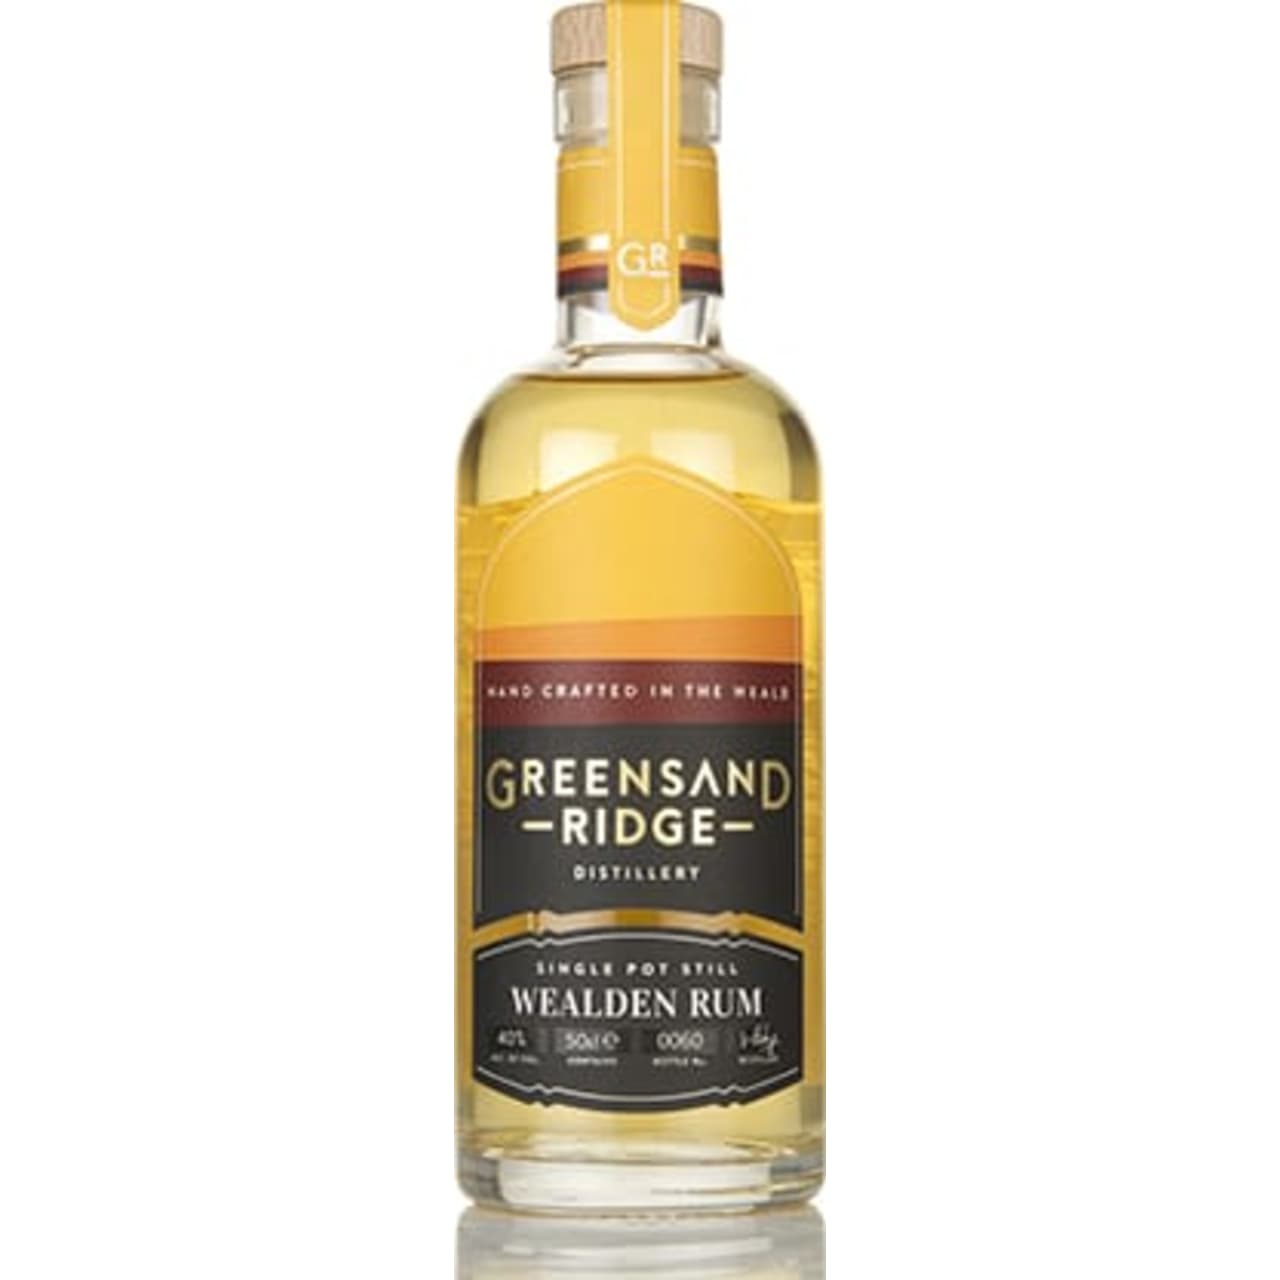 Greensand Ridge Wealden Rum has a floral nose, giving way to subtle honeycomb and roast cobnuts on the palate. There's a long finish with raisin and oak in the finish and a sweet, full mouthfeel.